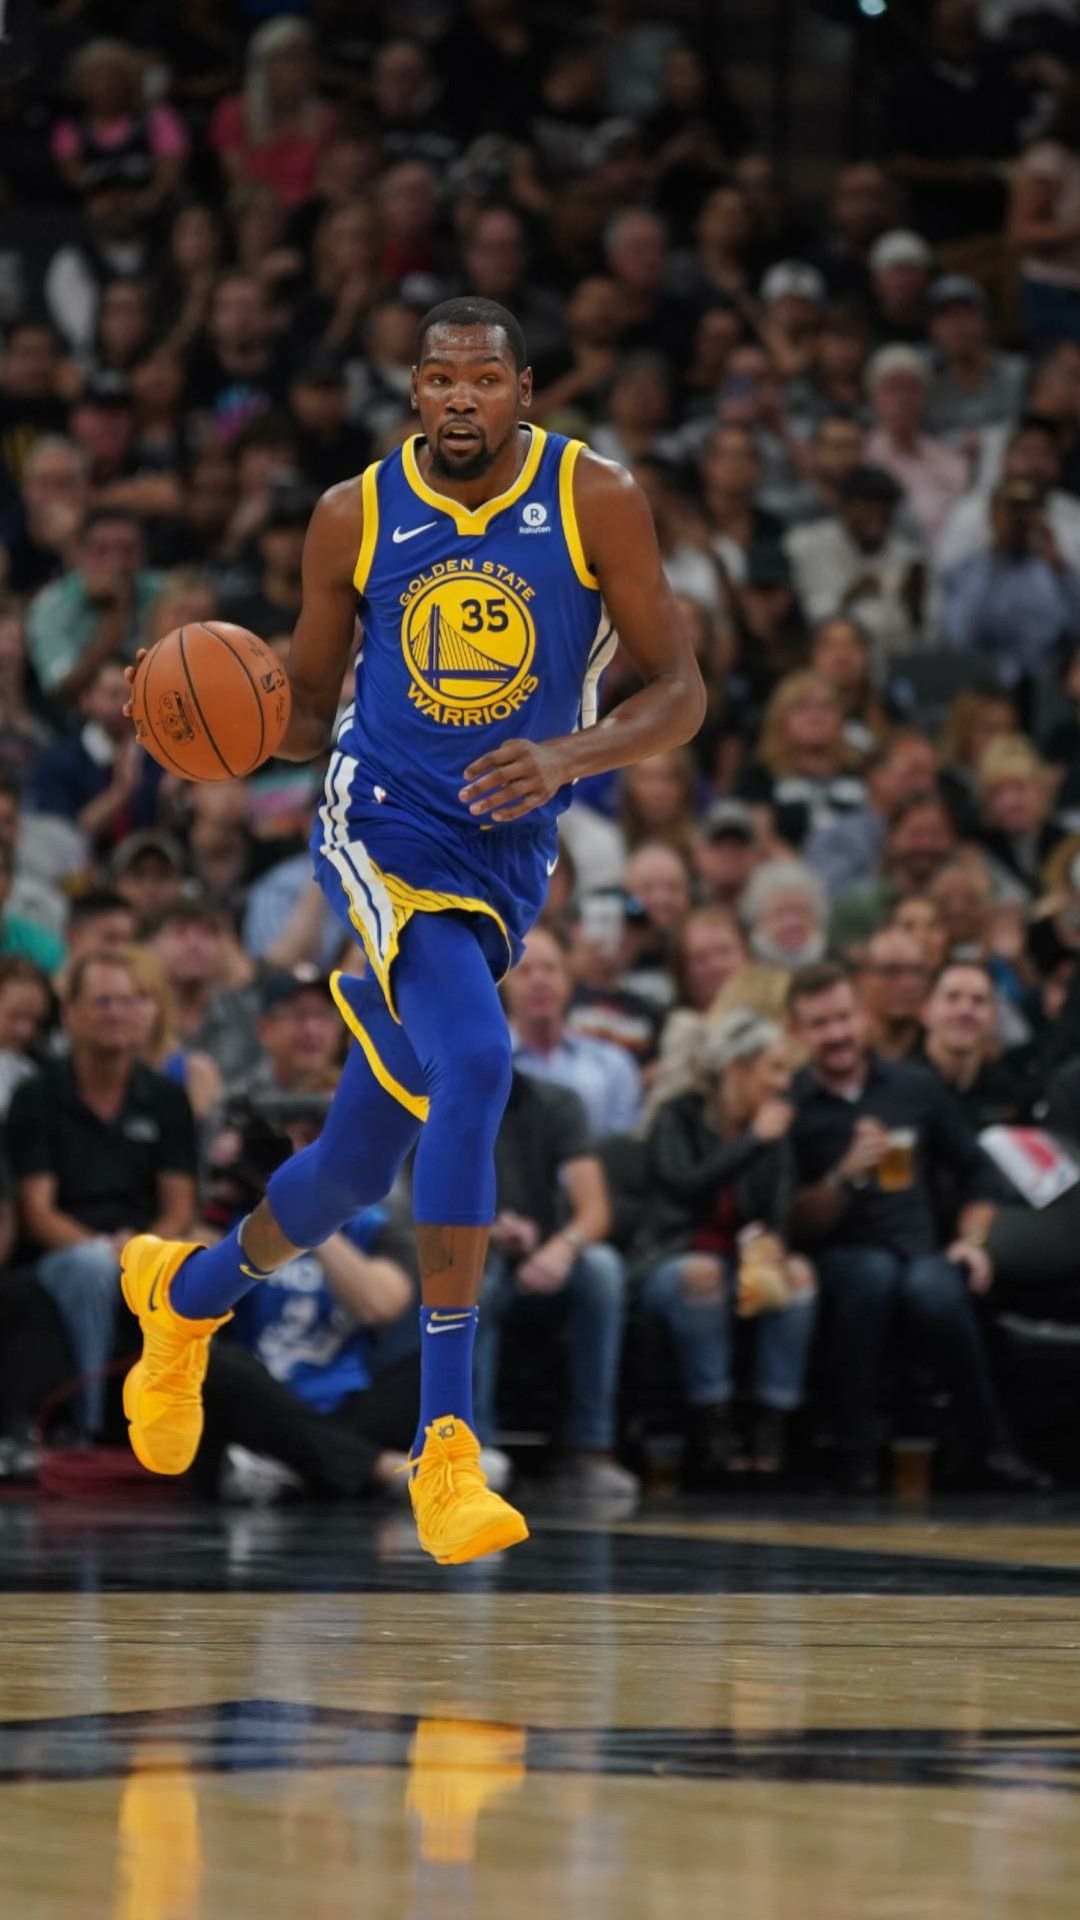 Kevin Durant Wallpaper About To Make History With His Shot